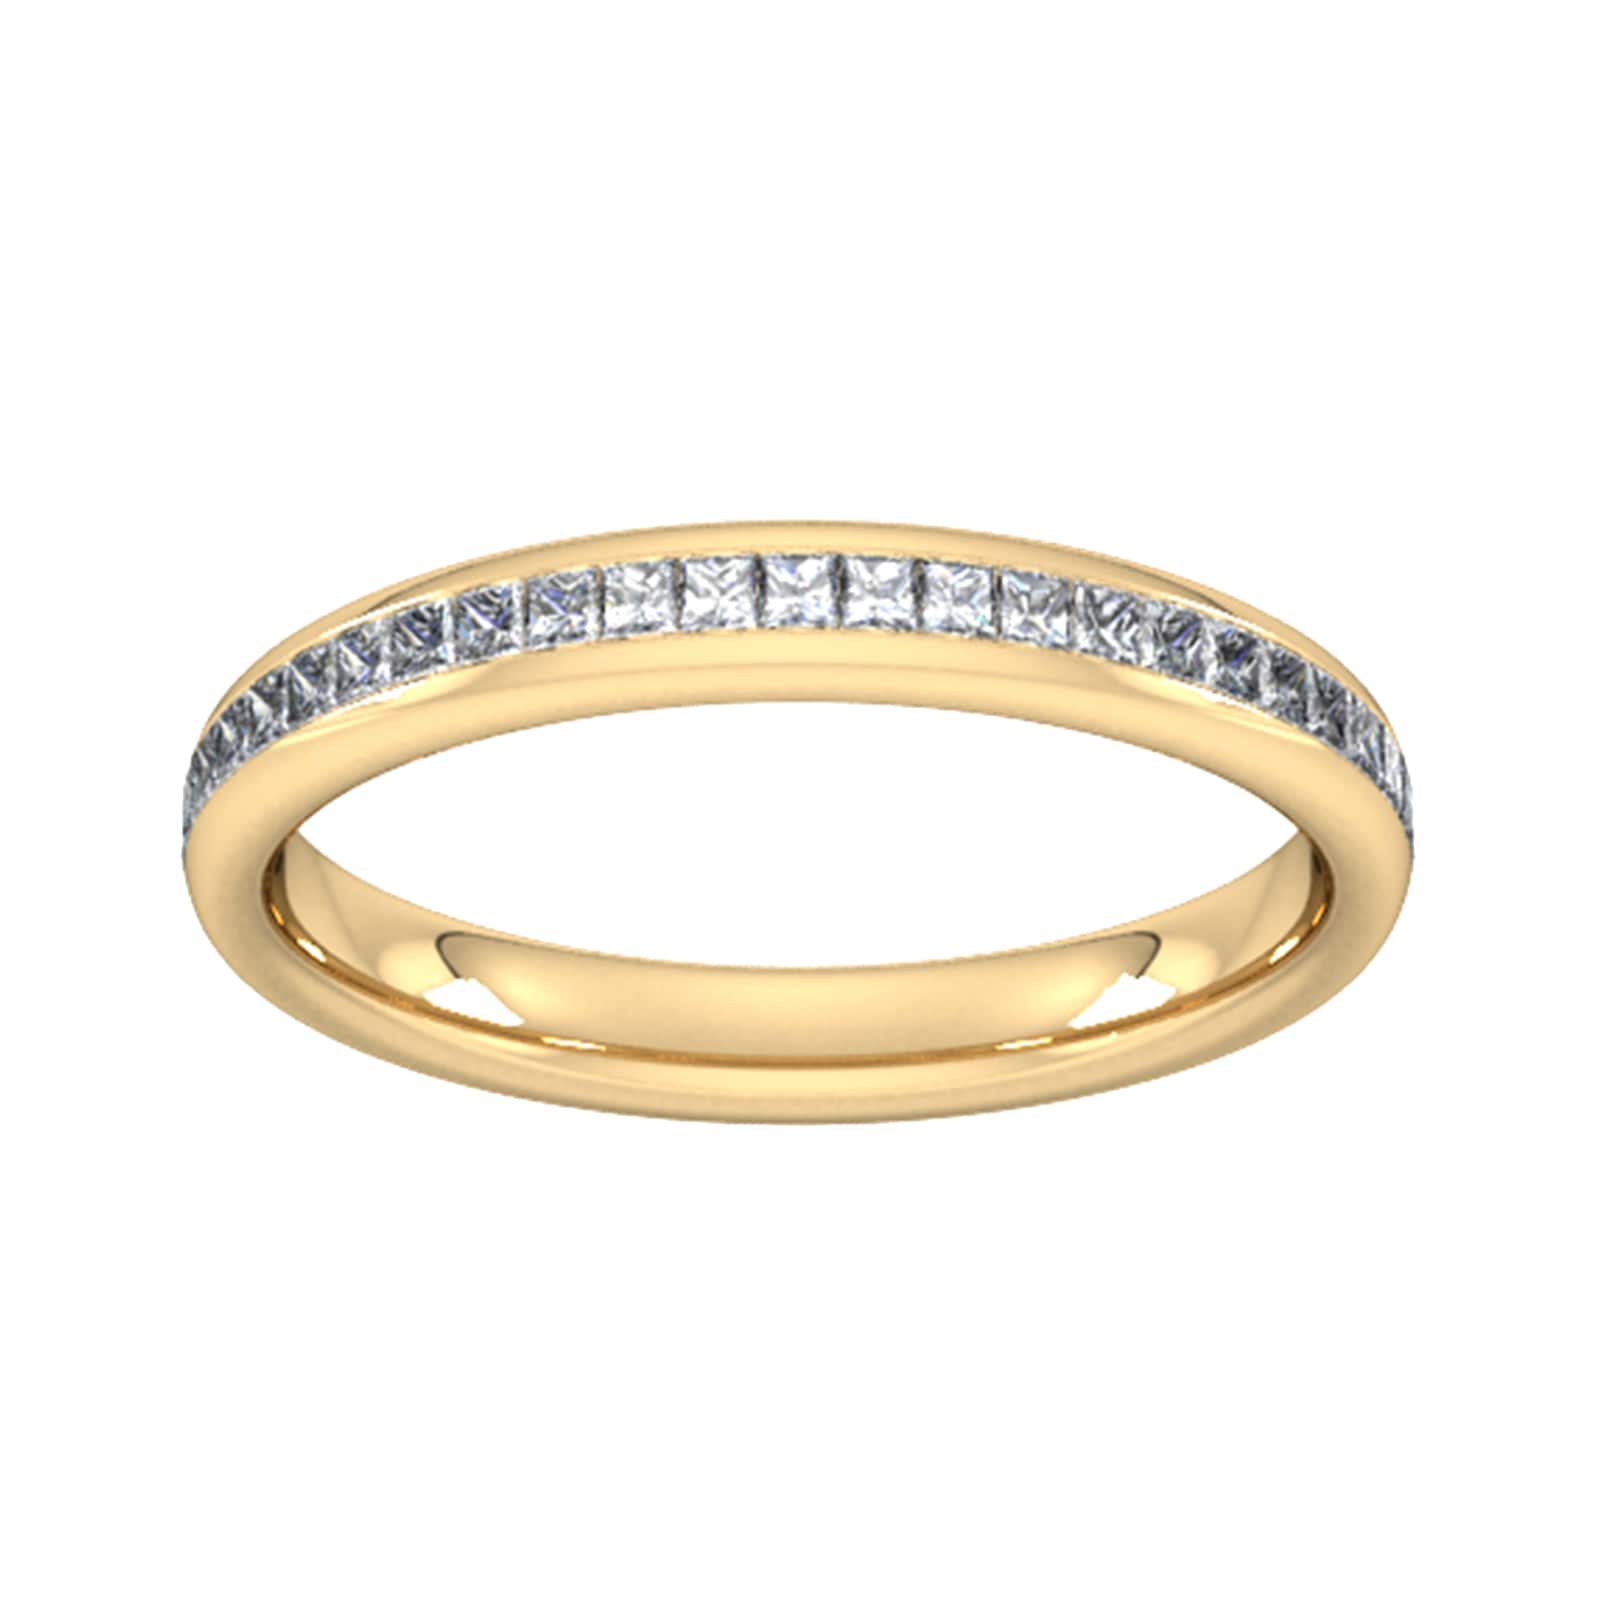 0.34 Carat Total Weight Princess Cut Channel Set Wedding Ring In 9 Carat Yellow Gold - Ring Size W